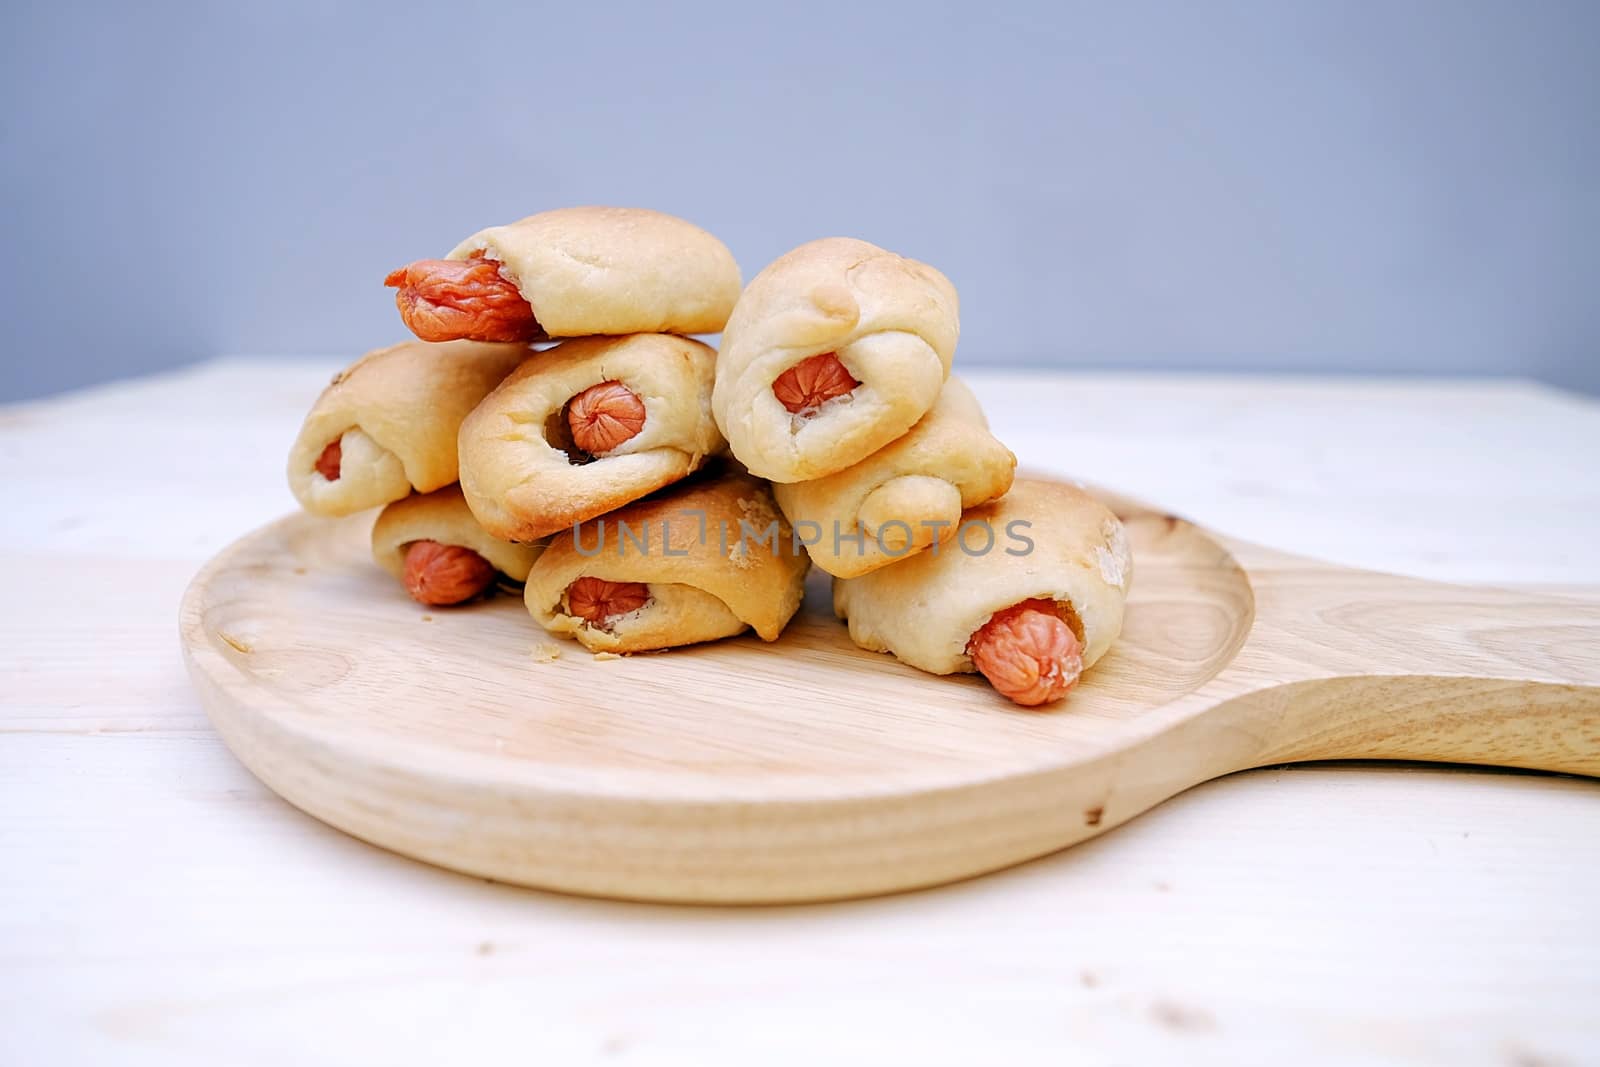 Sausage Bread in Dish on Table Wood